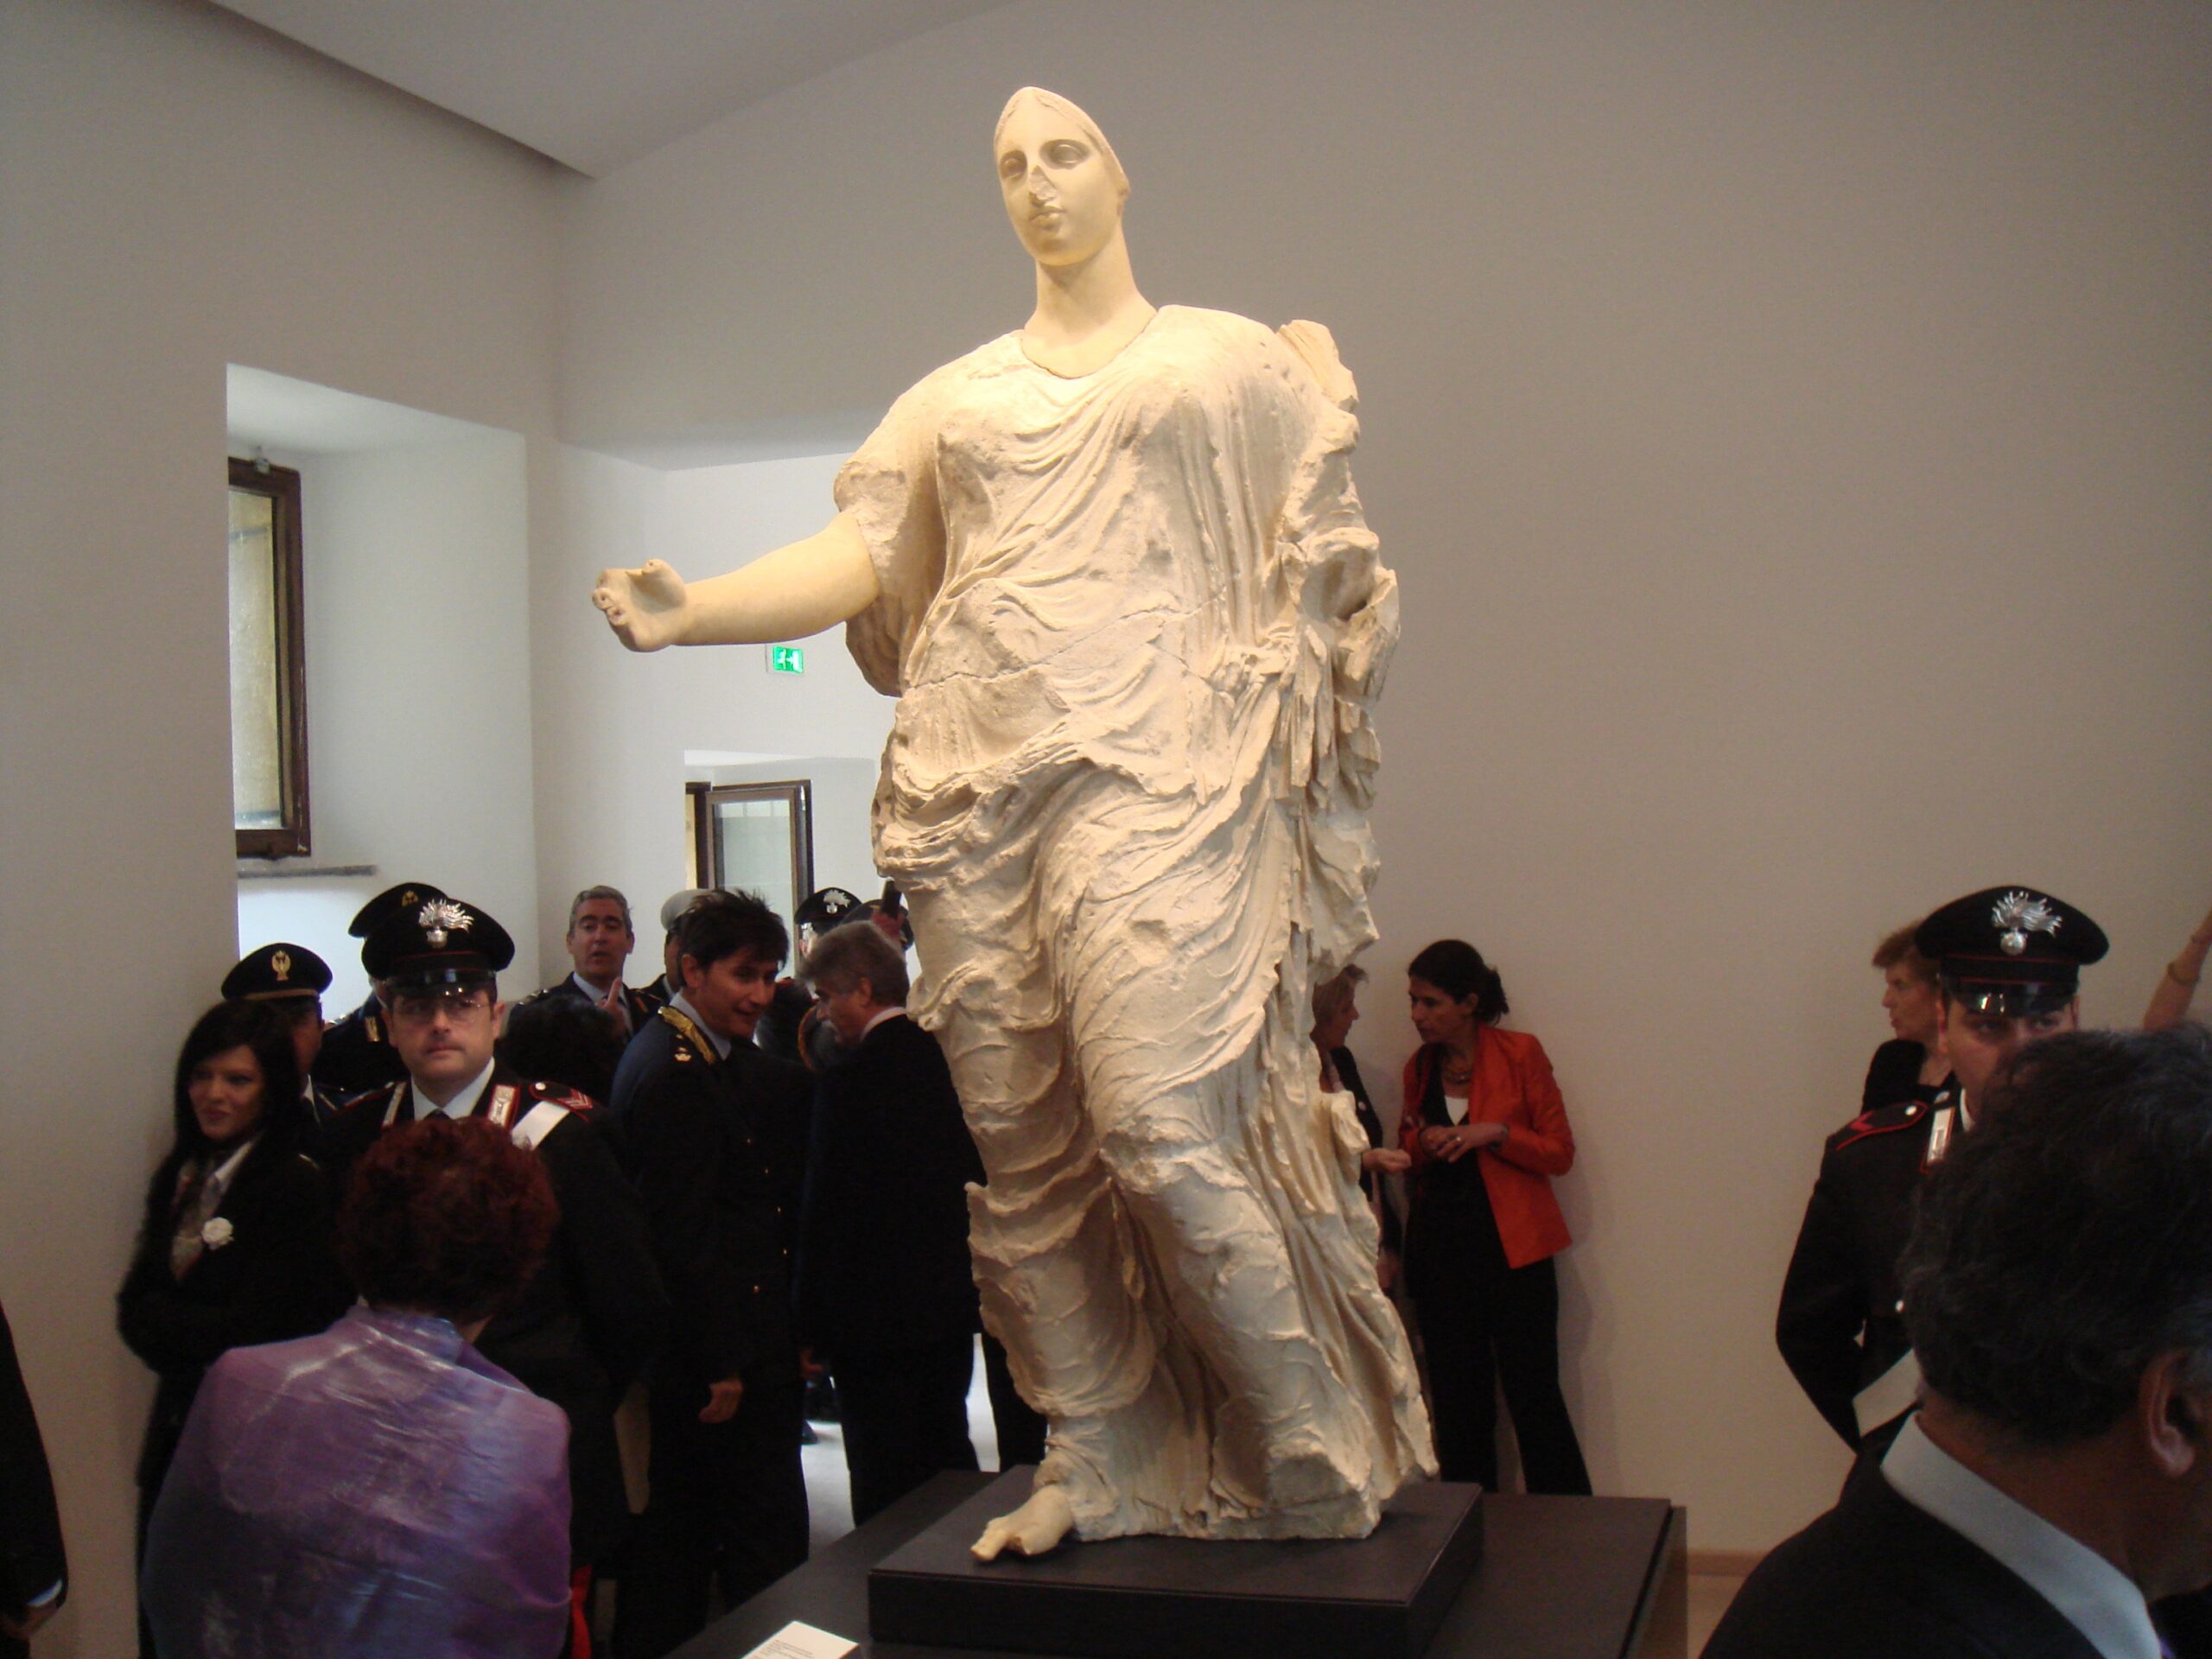 The 7.5-foot Statue of Aphrodite